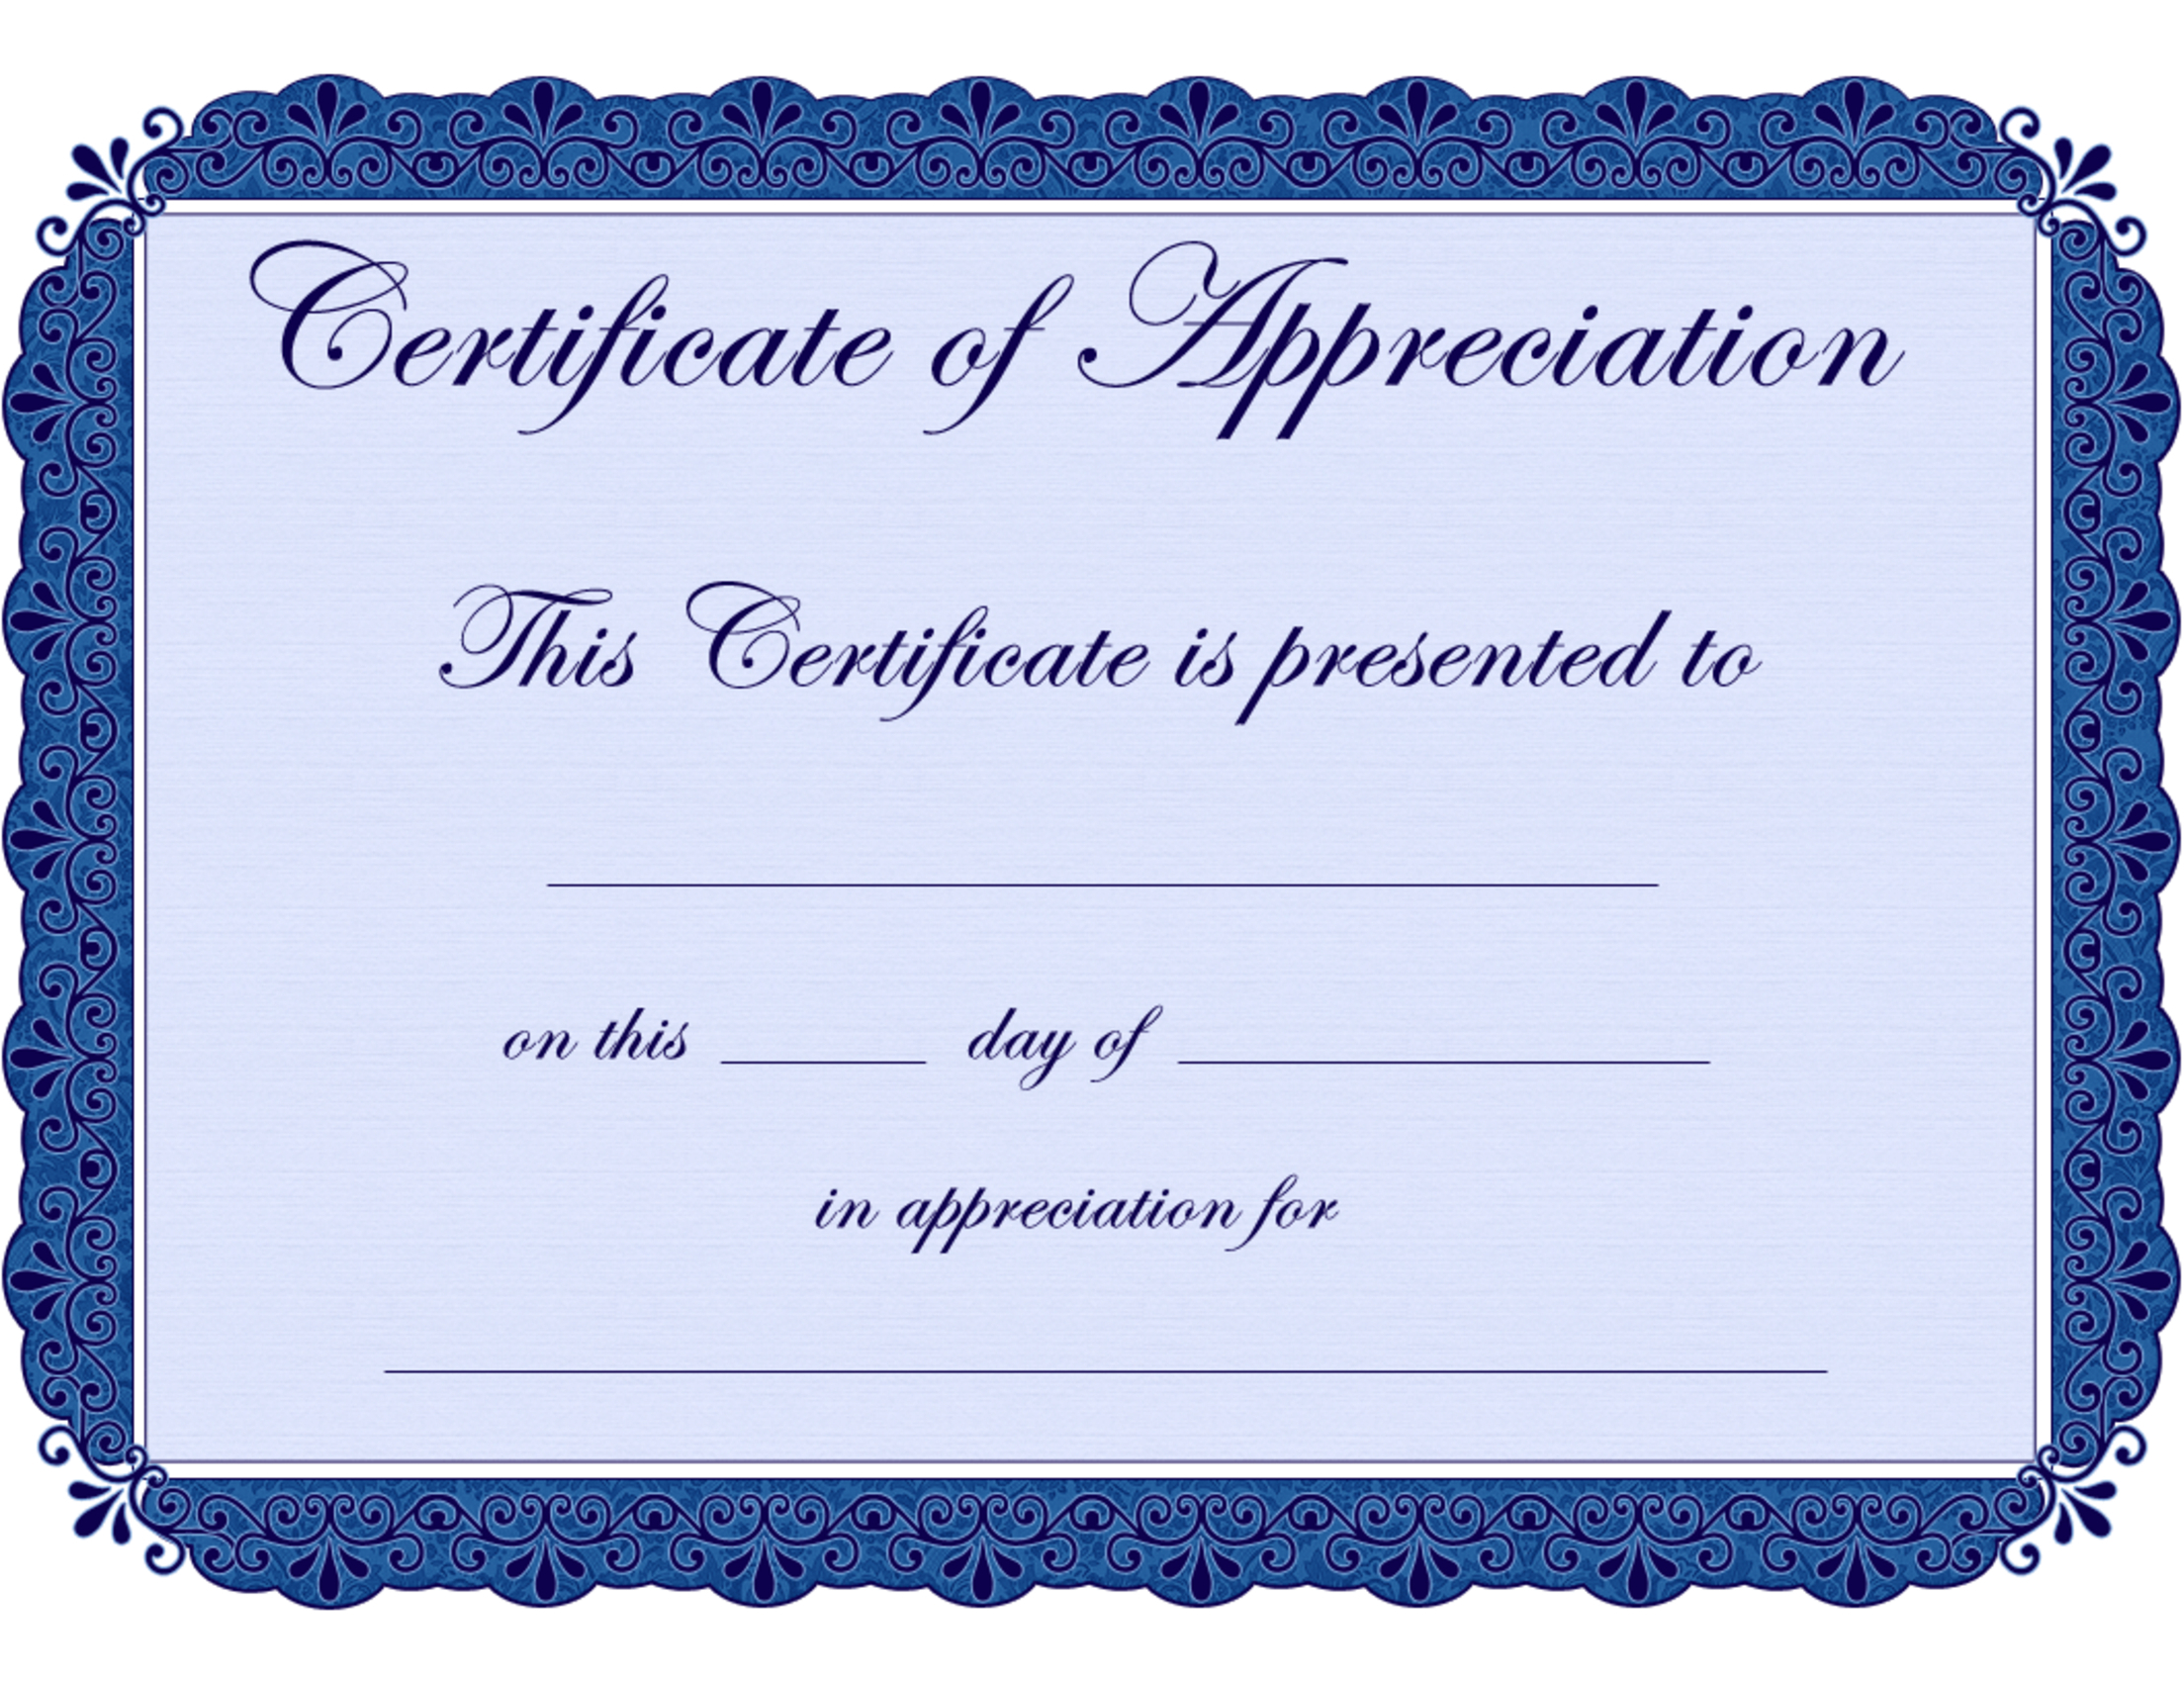 Free Printable Certificates Certificate Of Appreciation With With Retirement Certificate Template